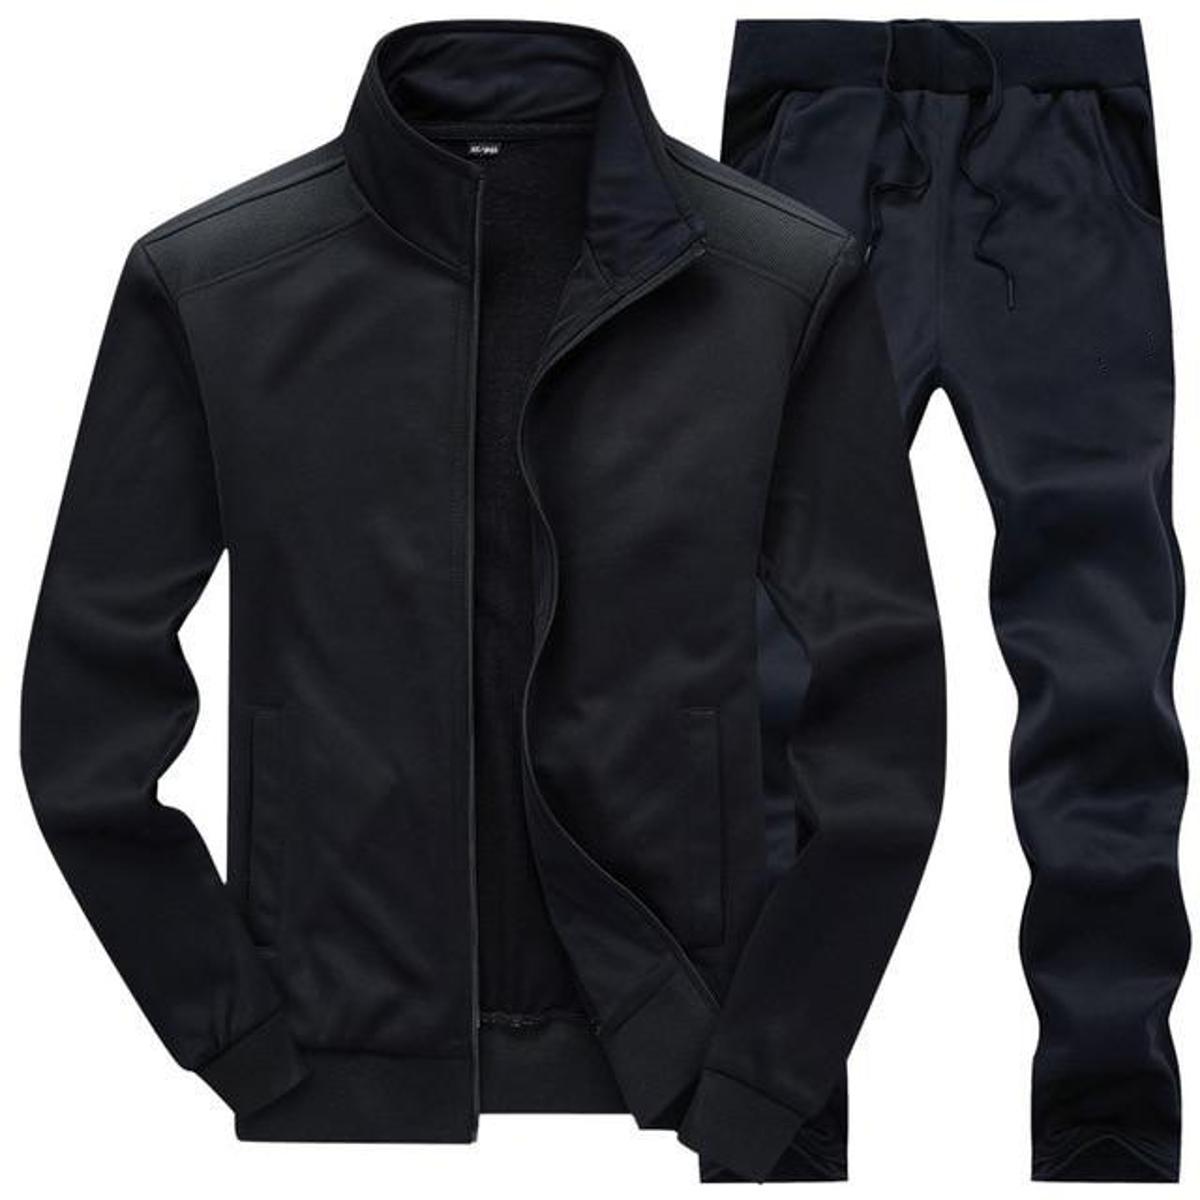 Buy Men's Baylan Style Track Suit at Lowest Price in Pakistan